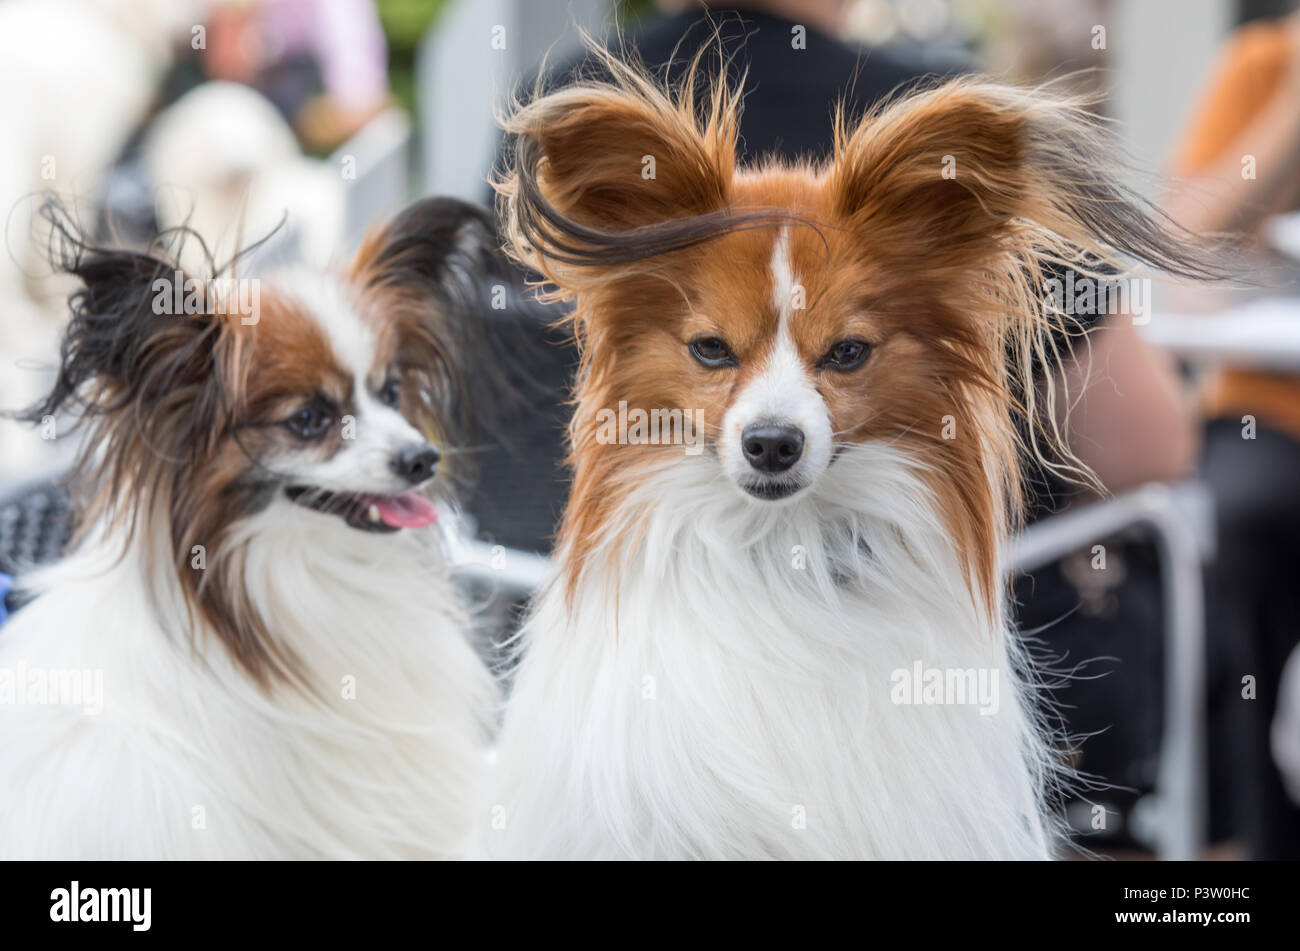 Erfurt, Germany. 16th June, 2018. Two Papillon dogs at the International and National Pedrigee Dogs Show as well as the International Pedigree Cats Show at the Erfurt fair. About 4000 dogs and more than 100 cats show themselves at their best. Credit: Arifoto Ug/Michael Reichel/dpa/Alamy Live News Stock Photo